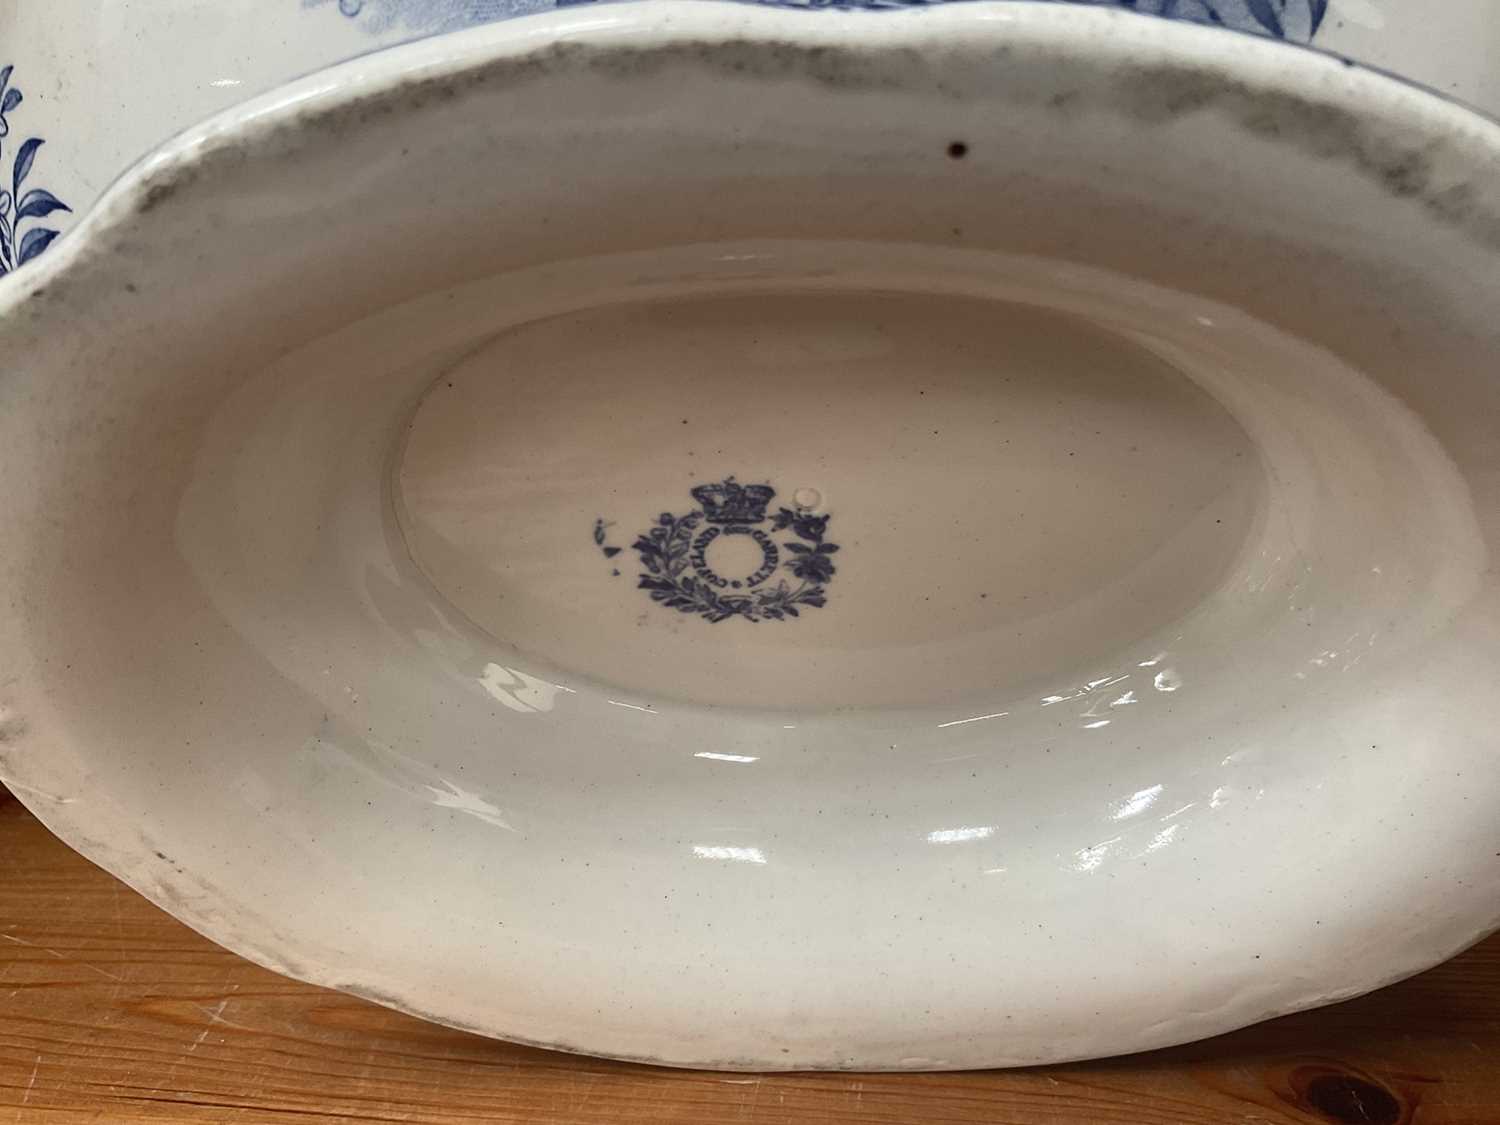 Early 19th century Copeland & Garrett (1833-1847) blue and white pedestal bowl - Image 2 of 7